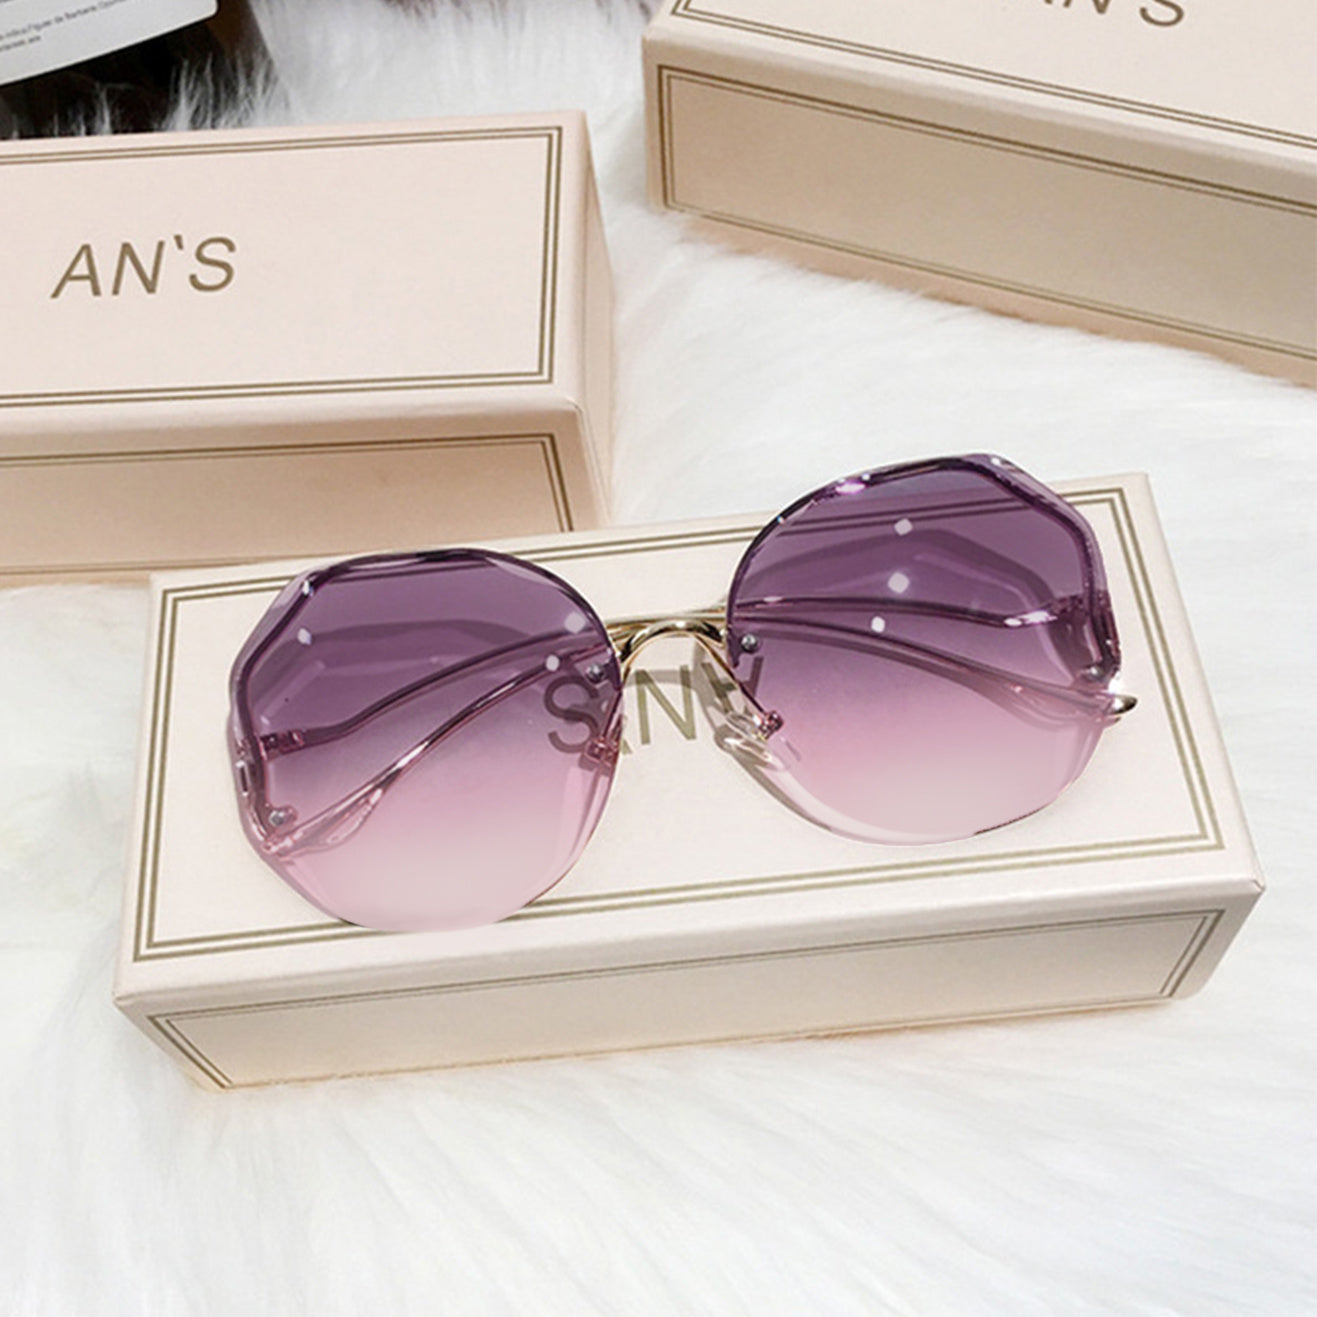 Elevate Your Look with Stylish, Oversized Square Sunglasses for Women! GRANIENT PURPLE